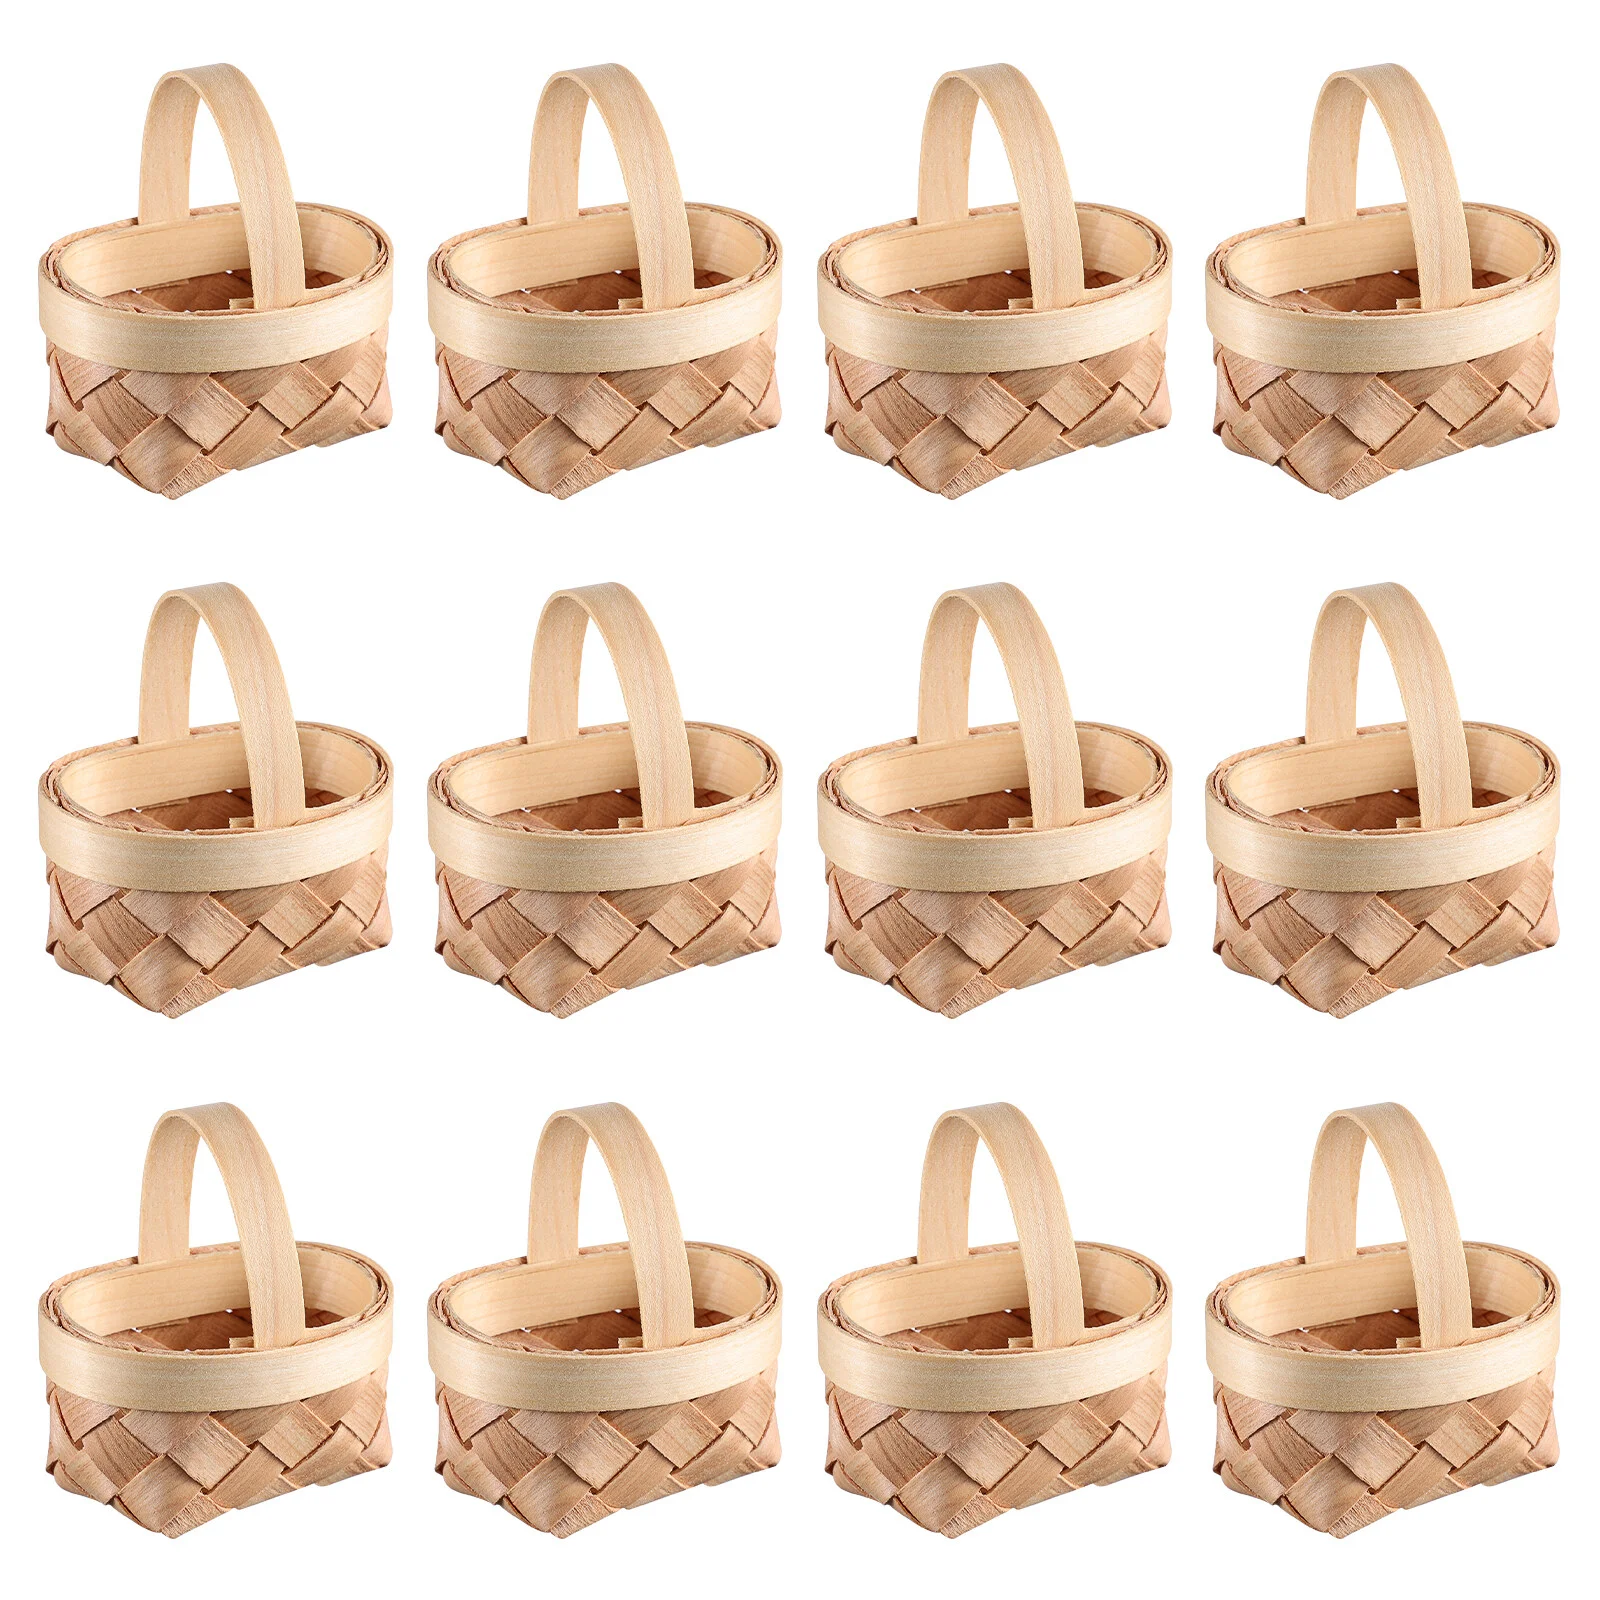 

12 Pcs Woven Basket Weave Mini Candy Wood Baskets Small Gift Wooden Party Favors Baby